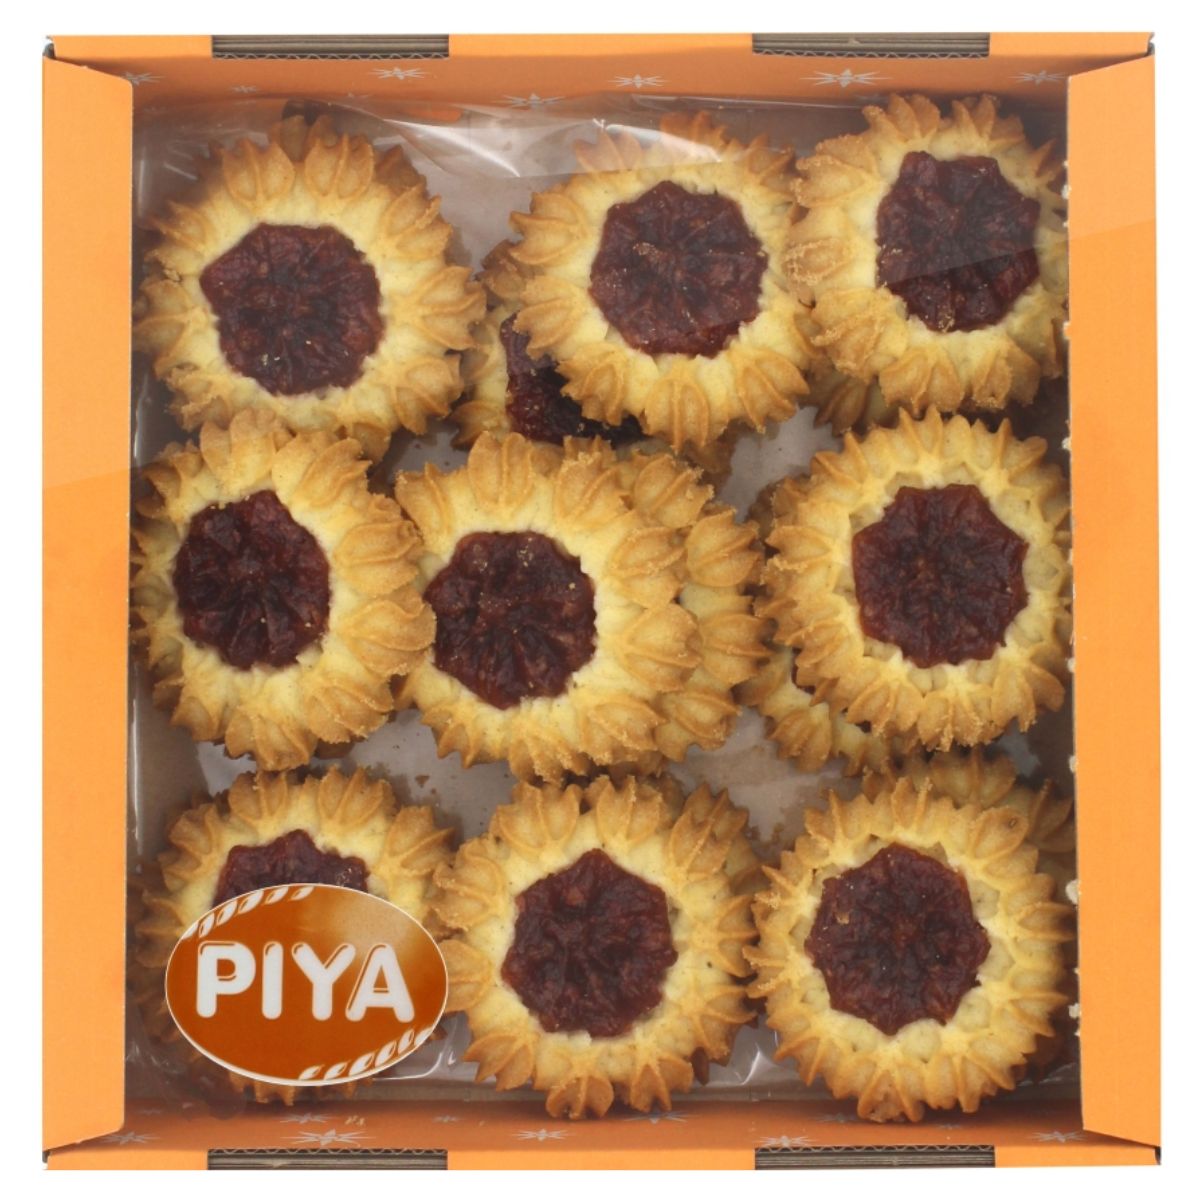 Piya cookies in a box with cherry filling.